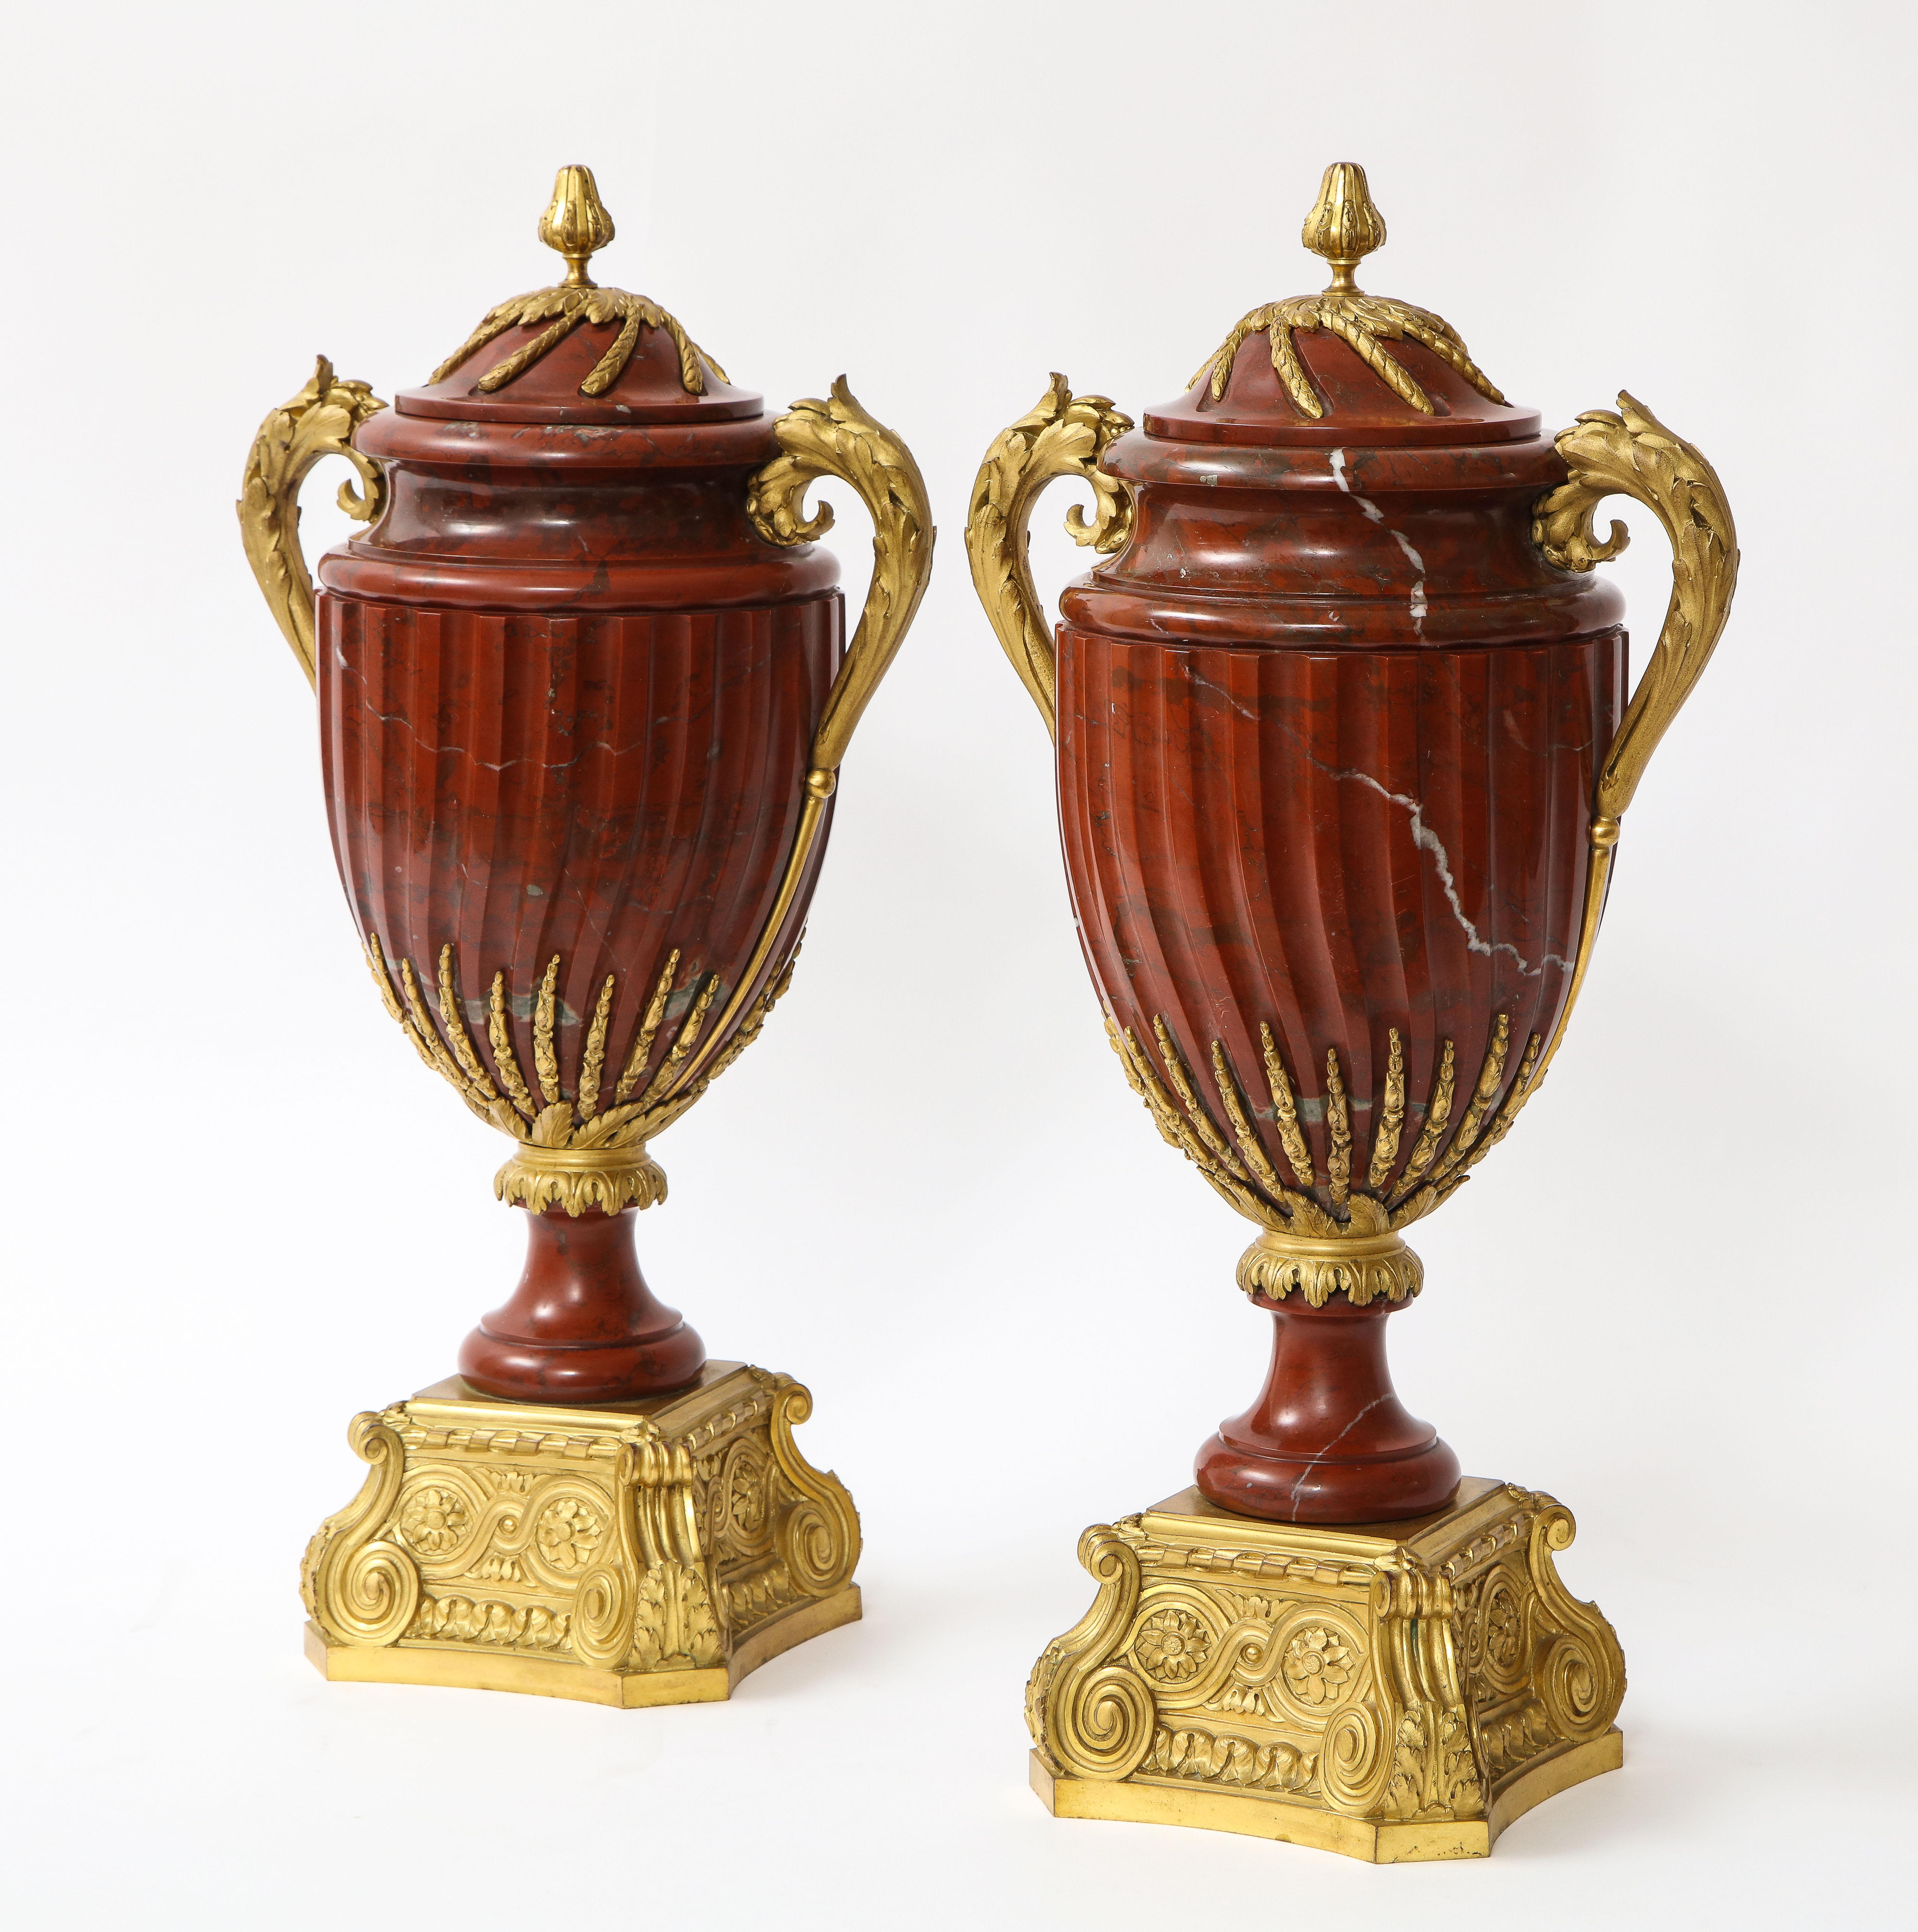 An elaborate pair of French 19th century Louis XVI style ormolu mounted rouge marble covered vases, signed MAISON BOUDET. Each of baluster form, mounted with ormolu acanthus leaf handles, the covers with ormolu vines attached to a circular acanthus